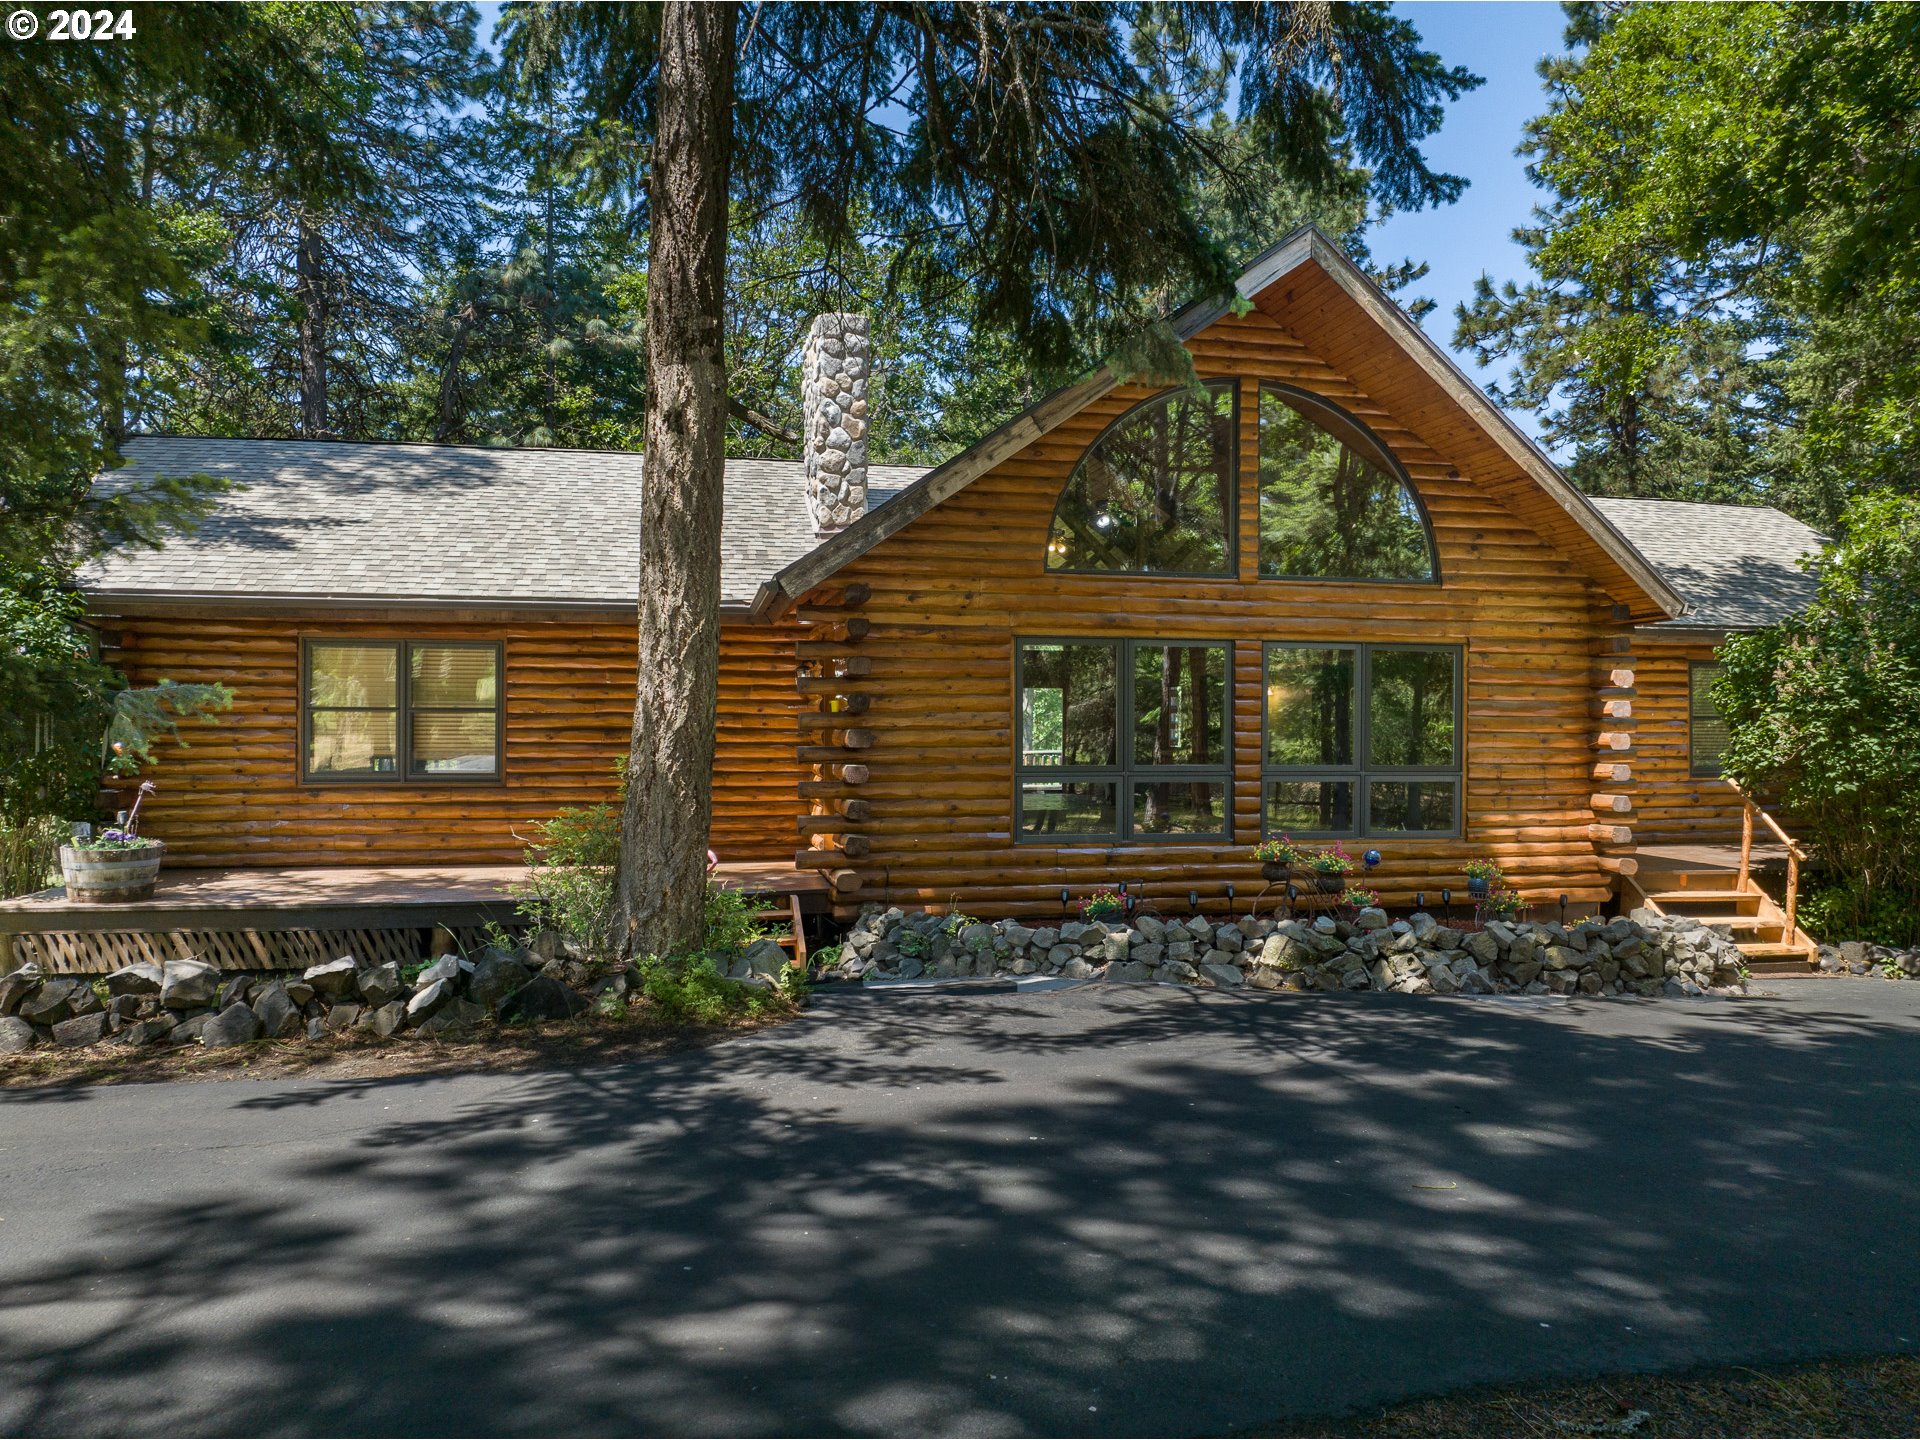 2038 STATE RD, Mosier, OR 